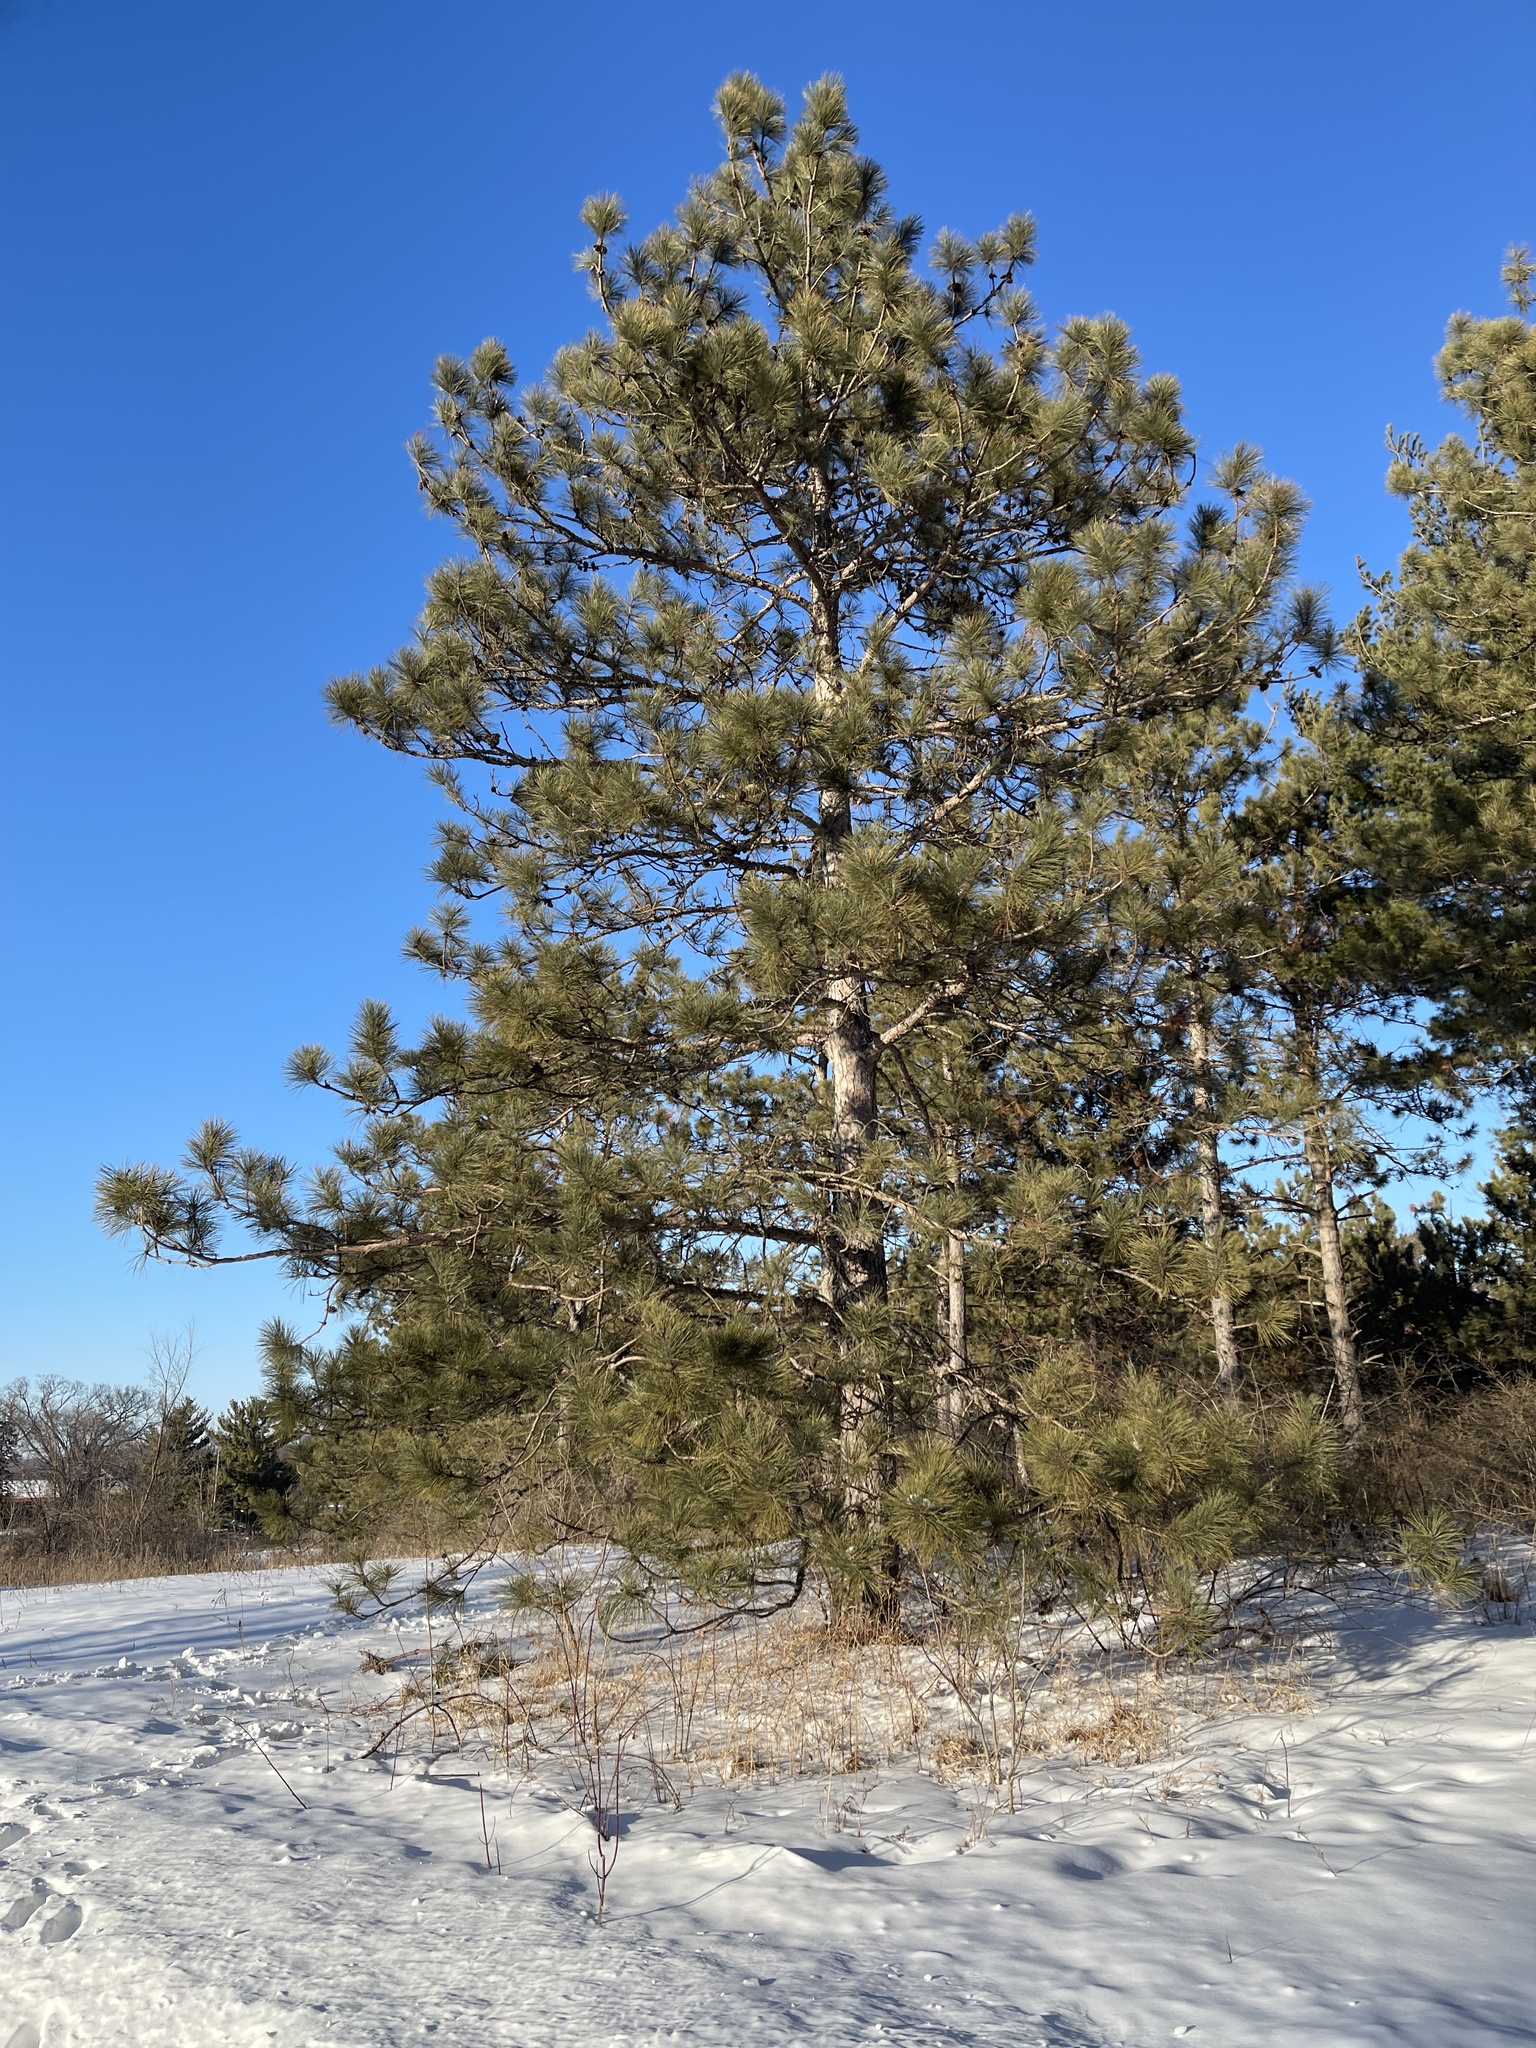 A sunlit scene with a large red pine tree. There is snow on the ground and a brilliant blue sky.